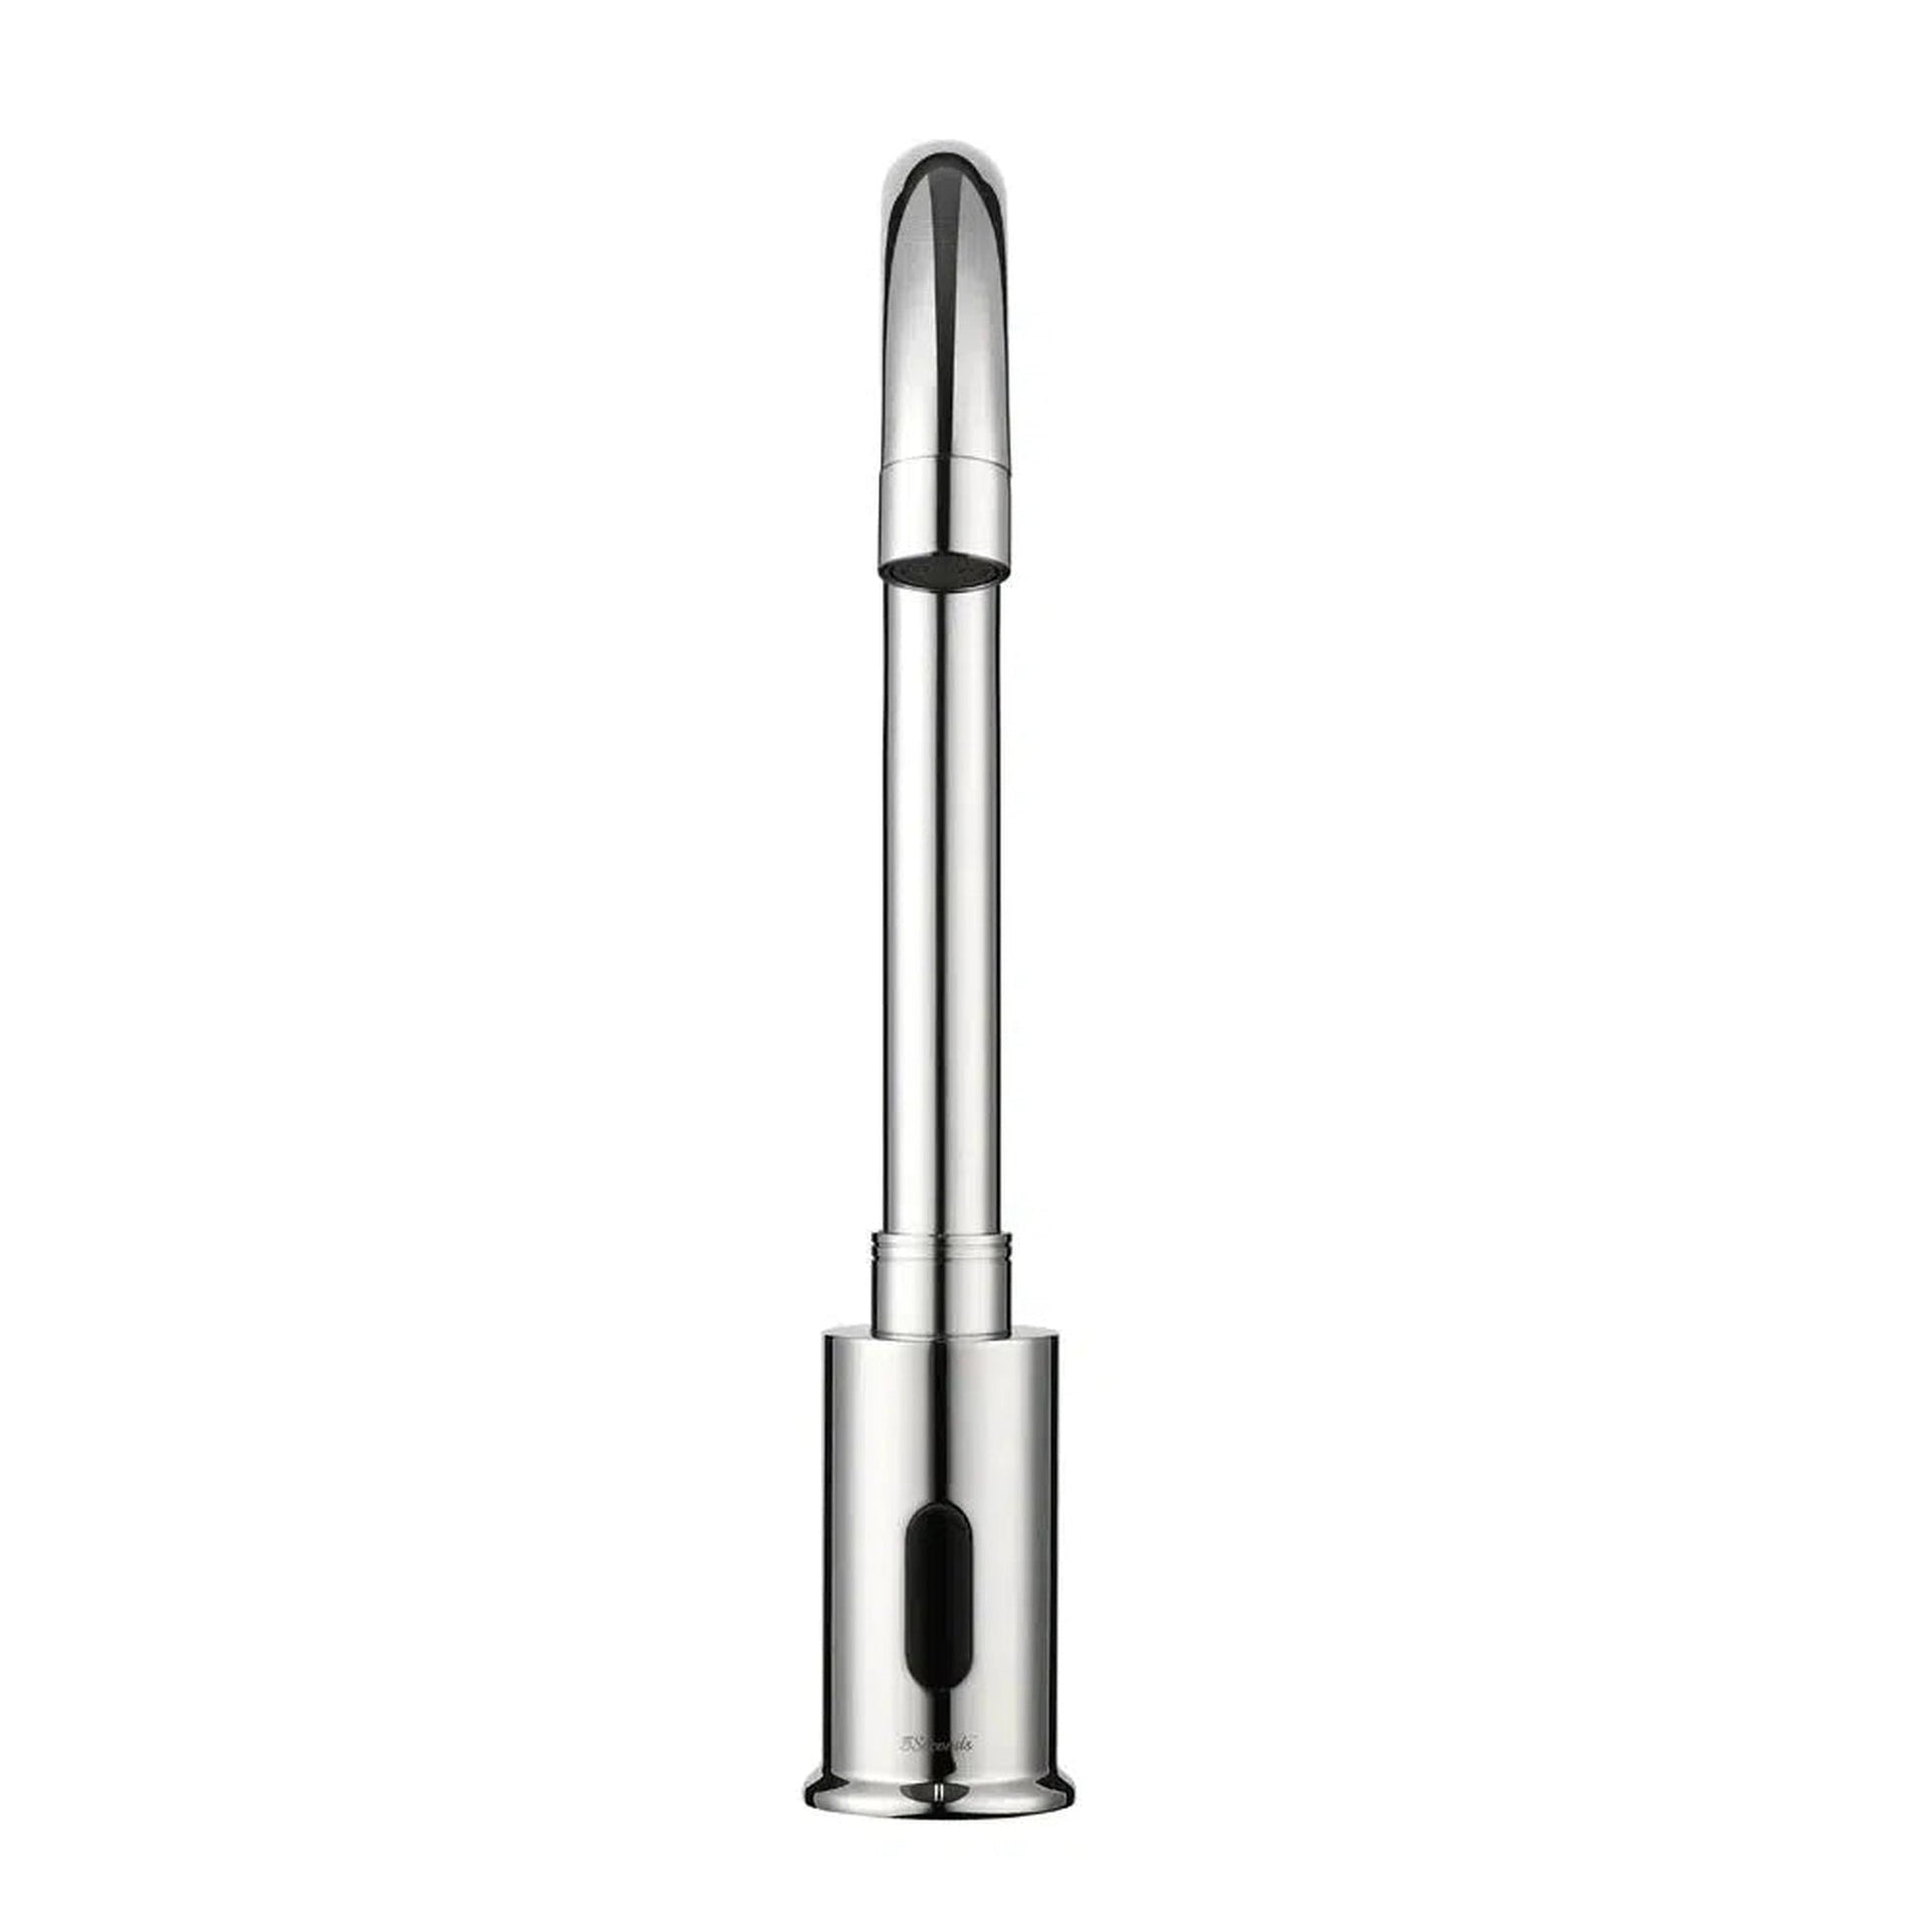 5Seconds Revive Series 5" Chrome Touchless Faucet With Temperature Control